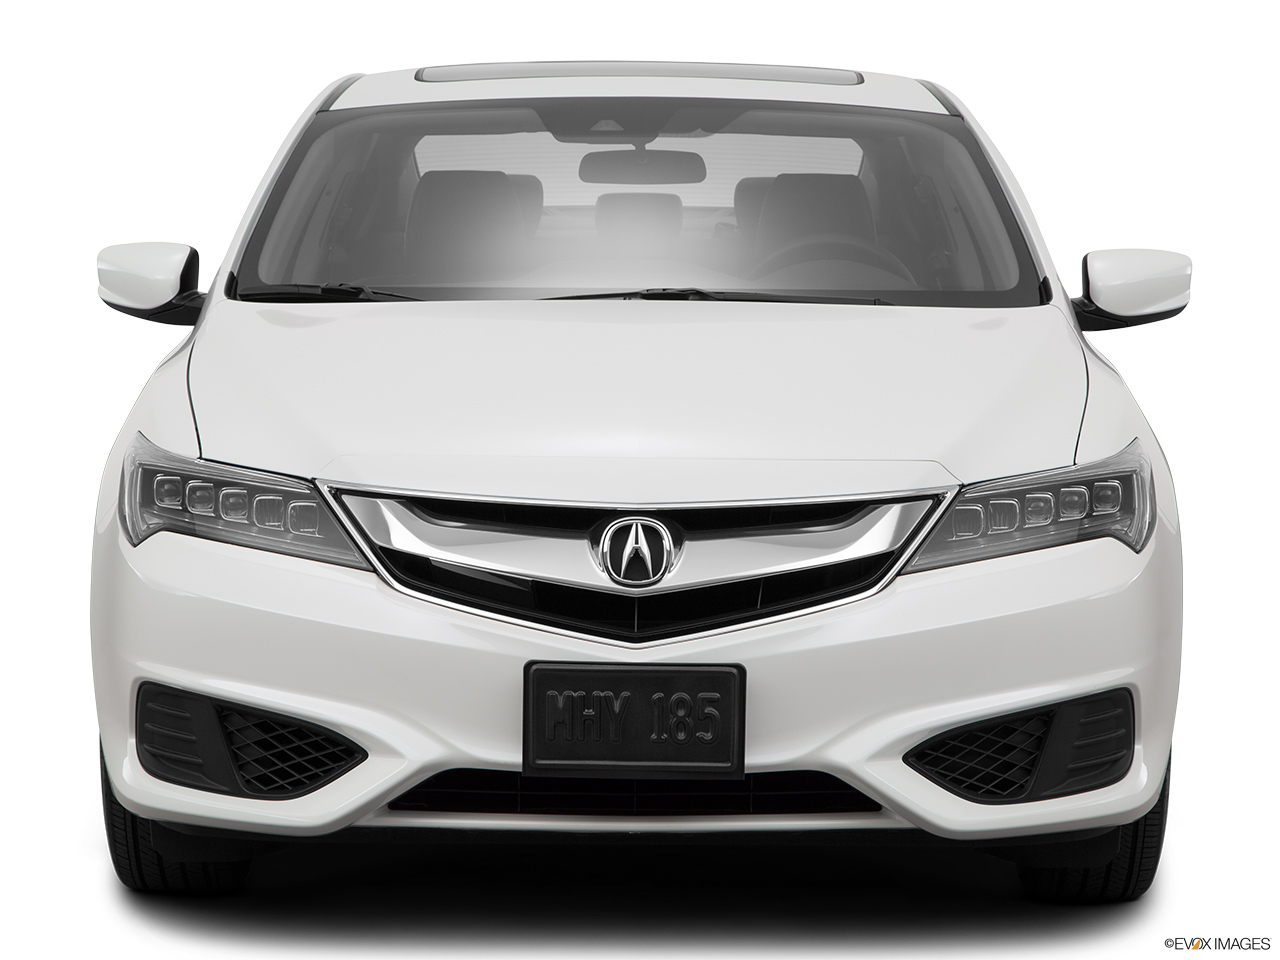 2016 Acura ILX AcuraWatch Plus Low/wide front. 